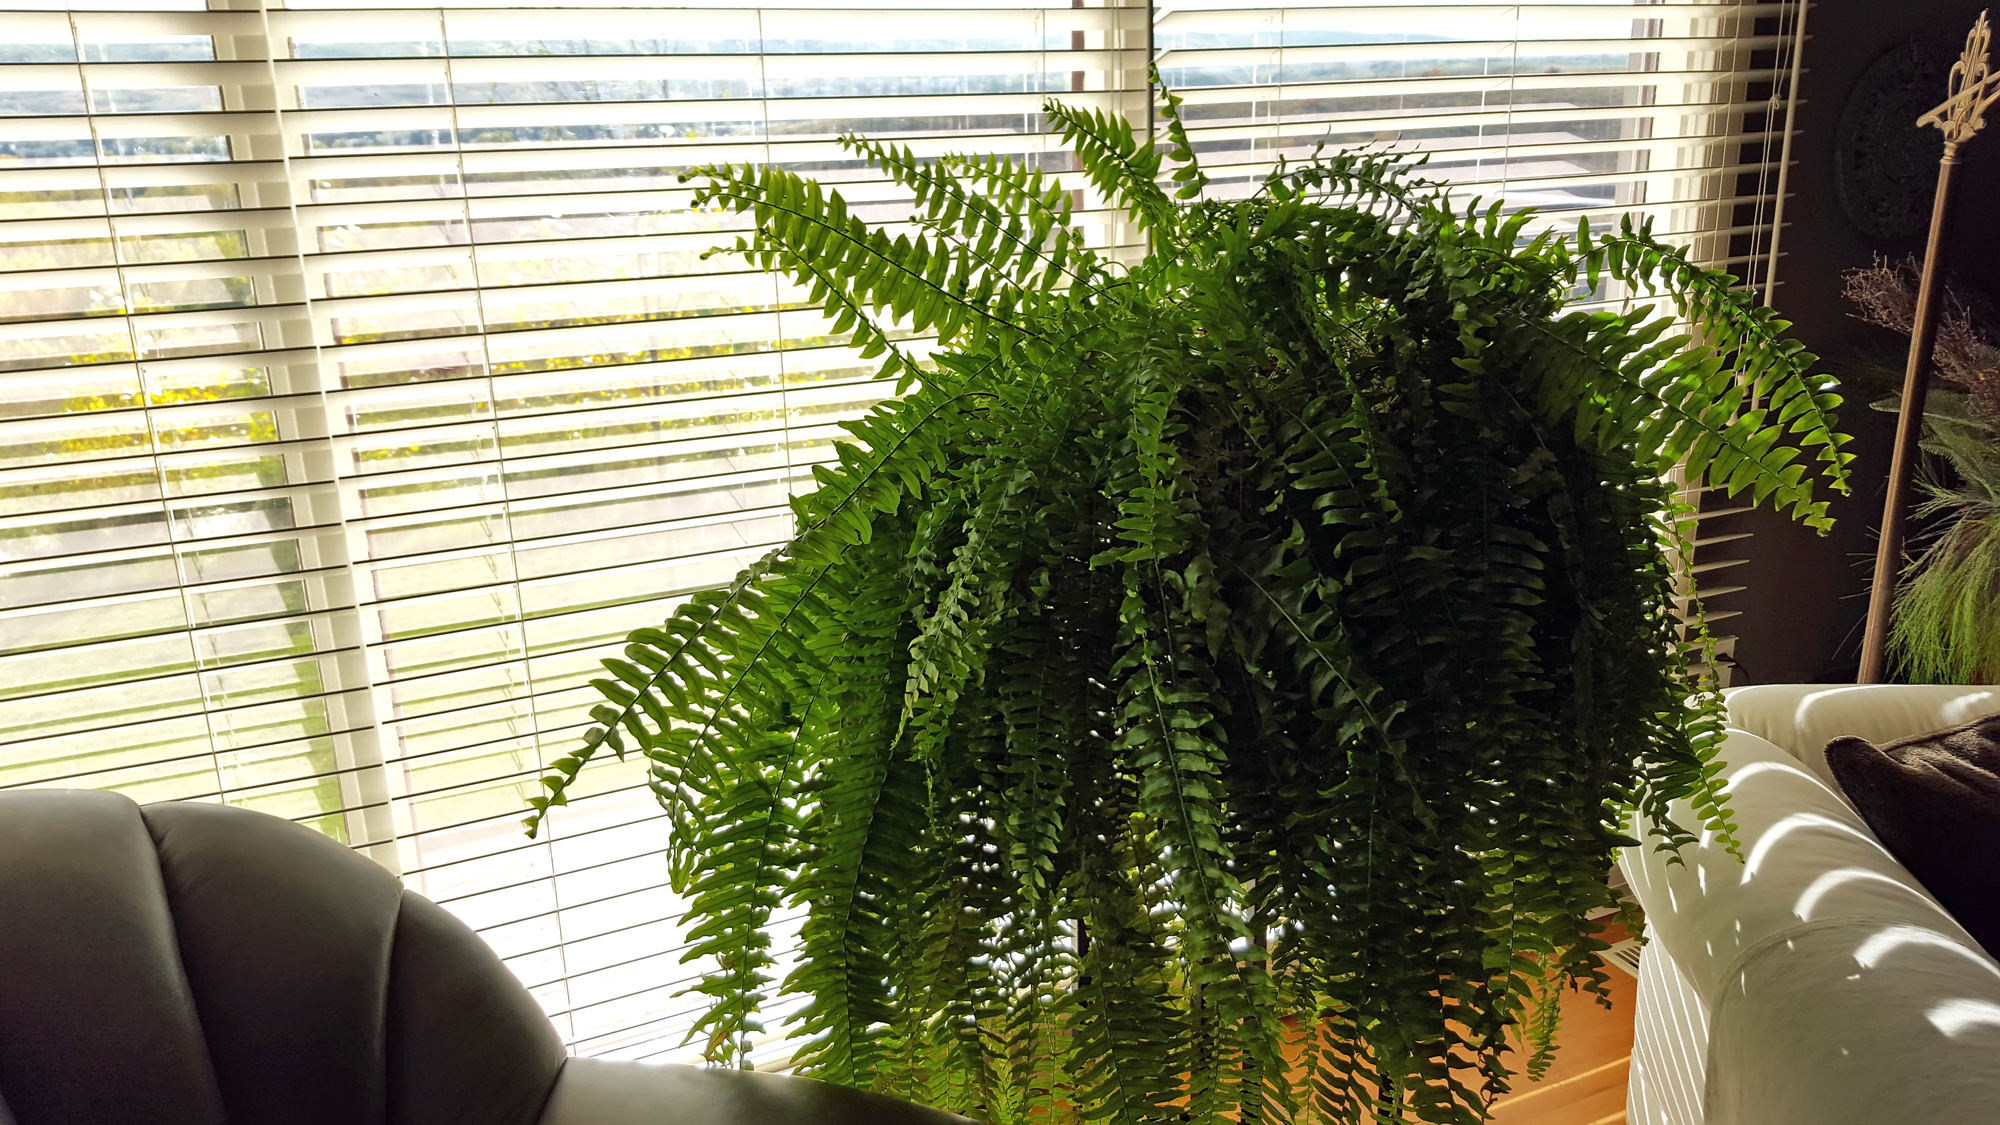 Large Boston Fern in living room window. Blinds and two large arm chairs.